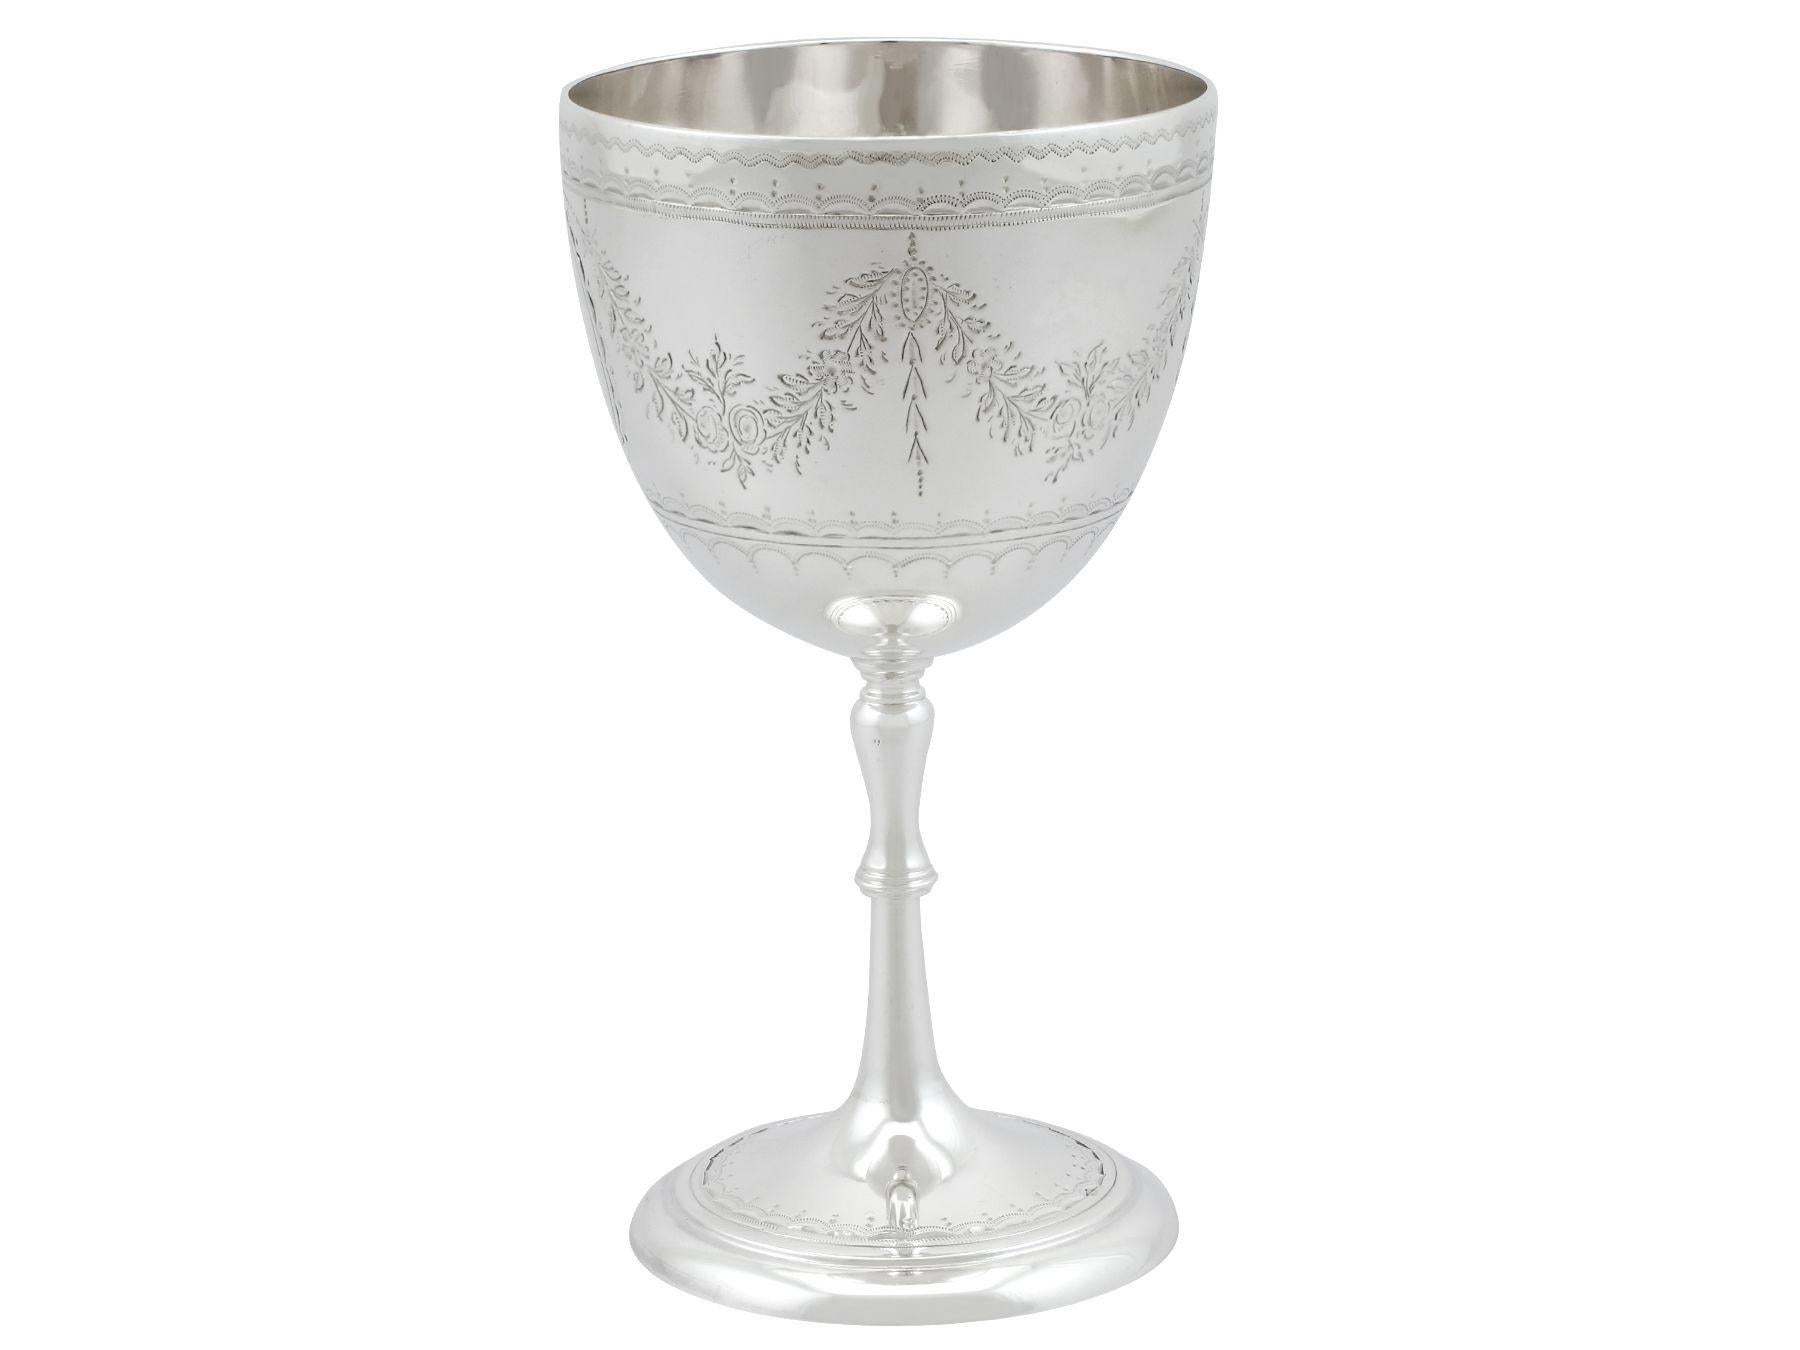 An exceptional, fine and impressive antique Victorian English sterling silver goblet; an addition to our collection of wine and drinks related silverware.

This exceptional antique Victorian sterling silver goblet has a circular bell shaped form